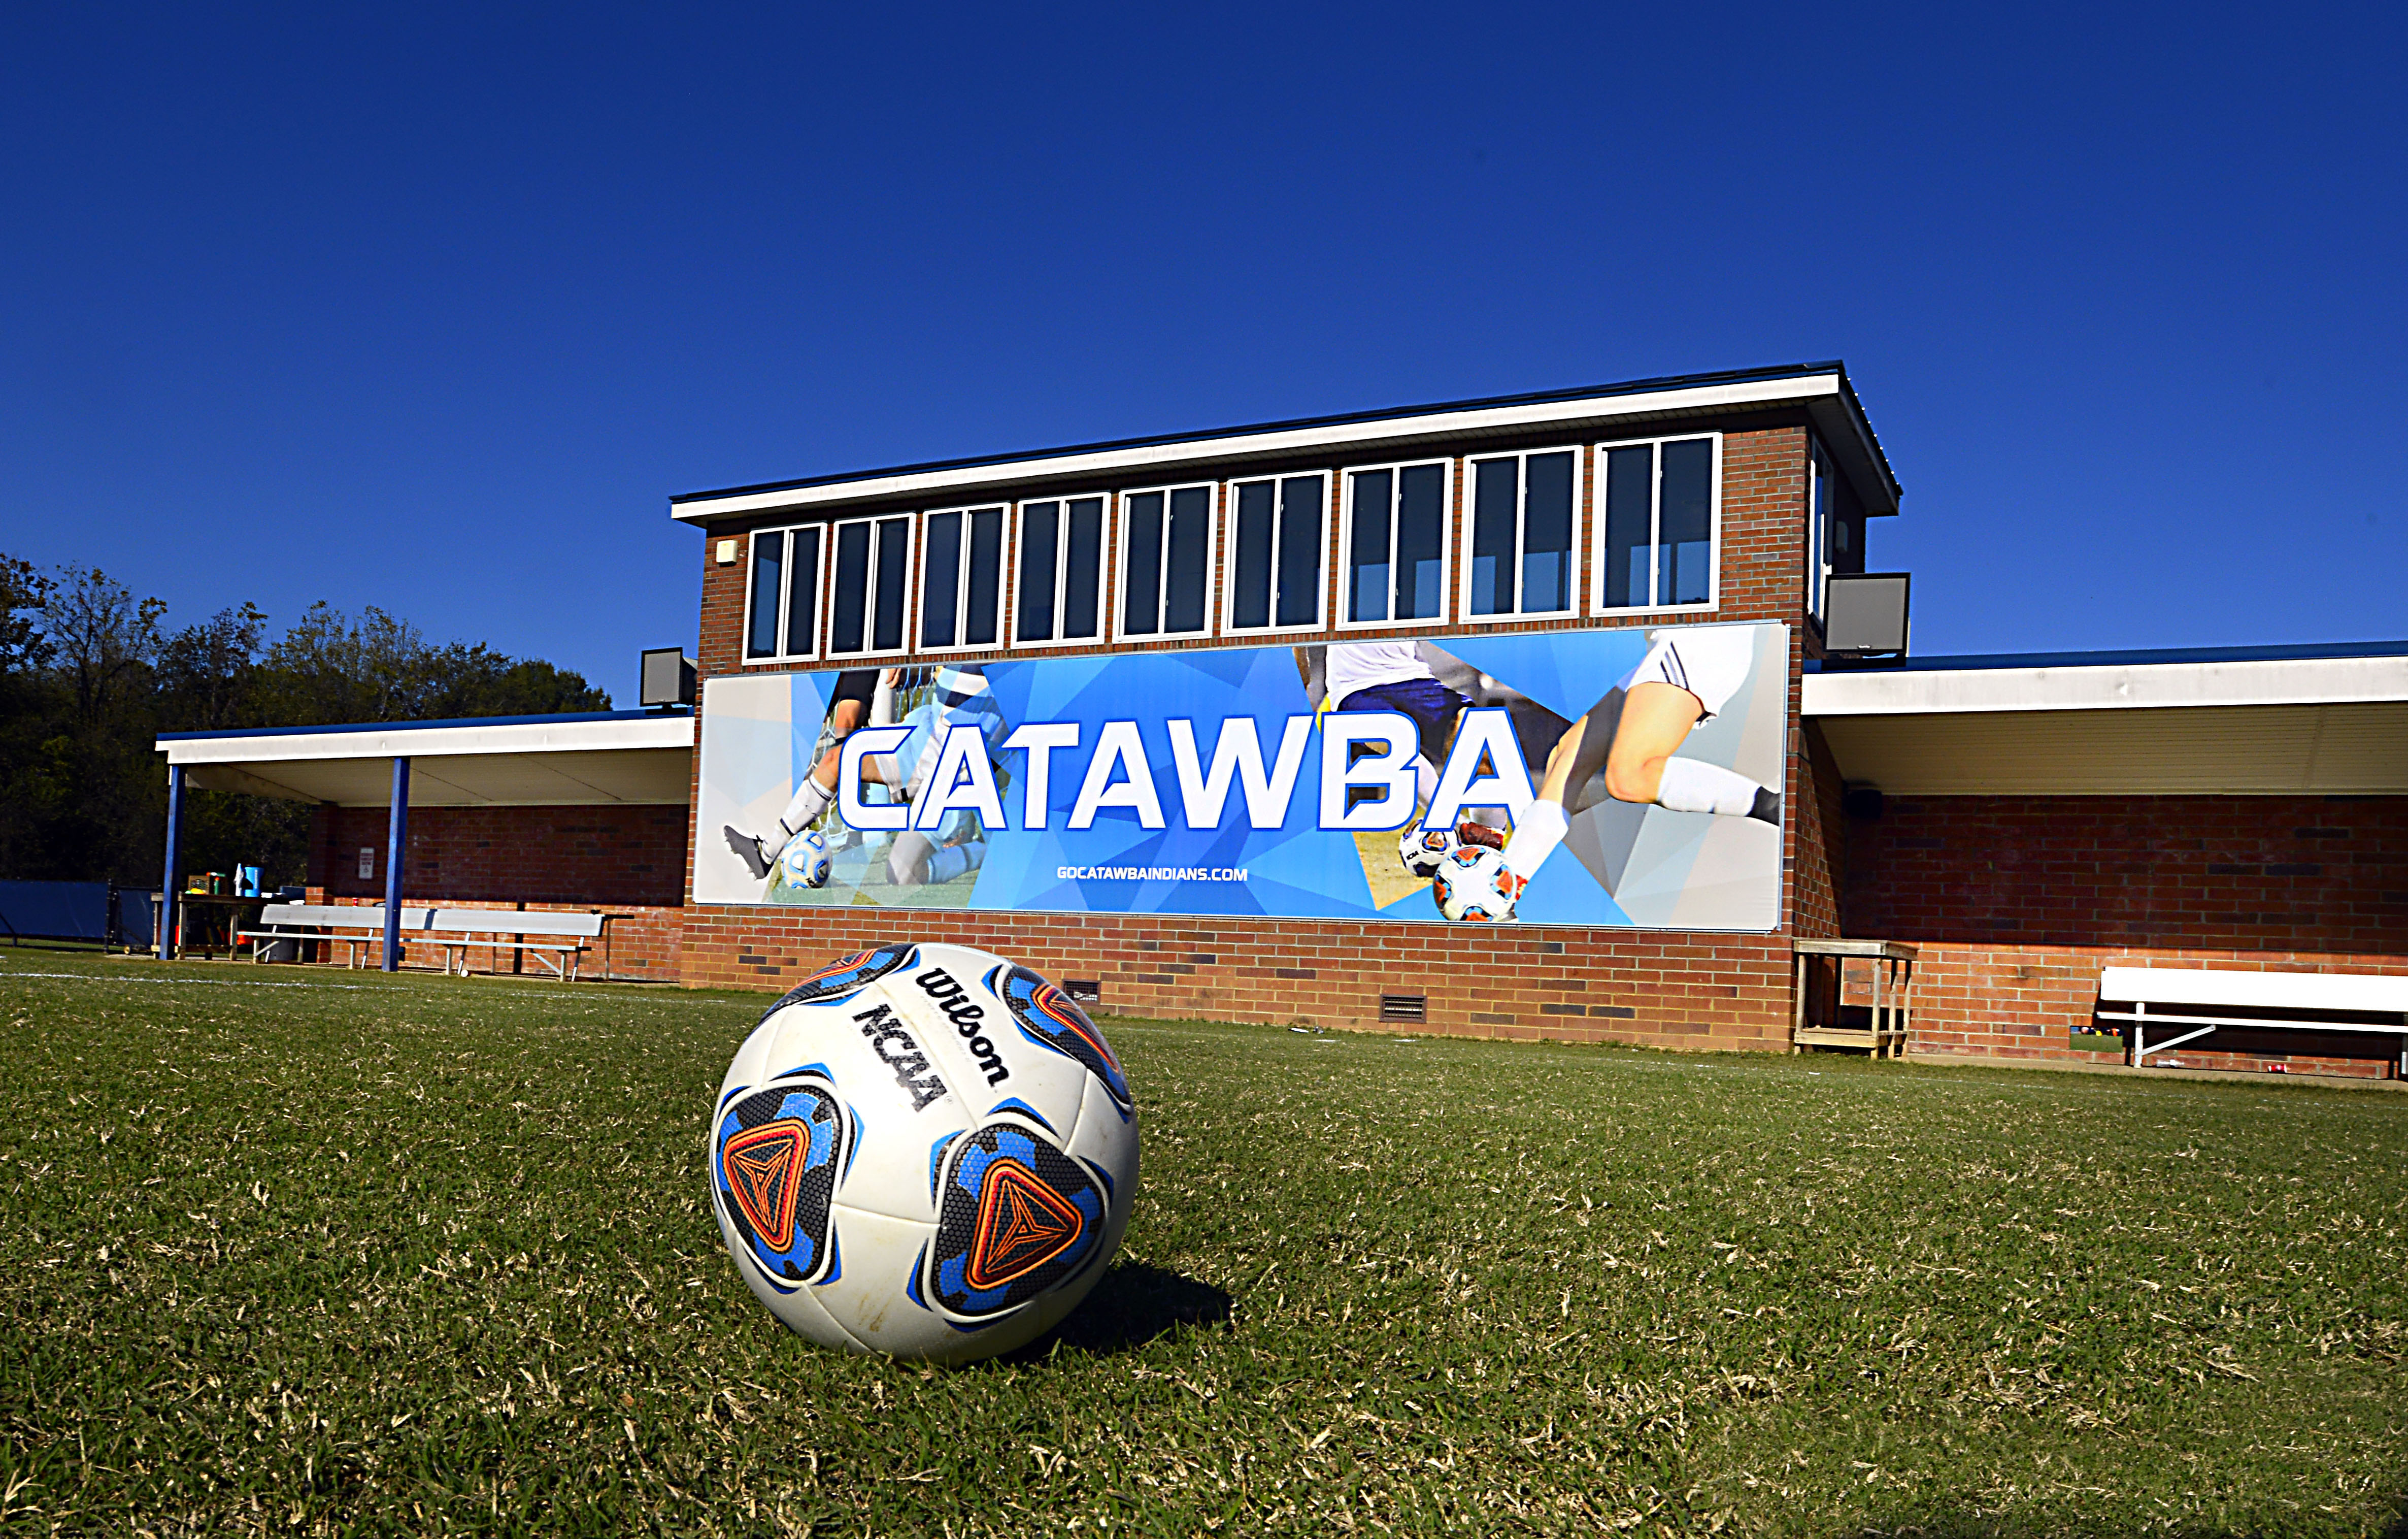 Catawba Soccer Youth Summer Camps